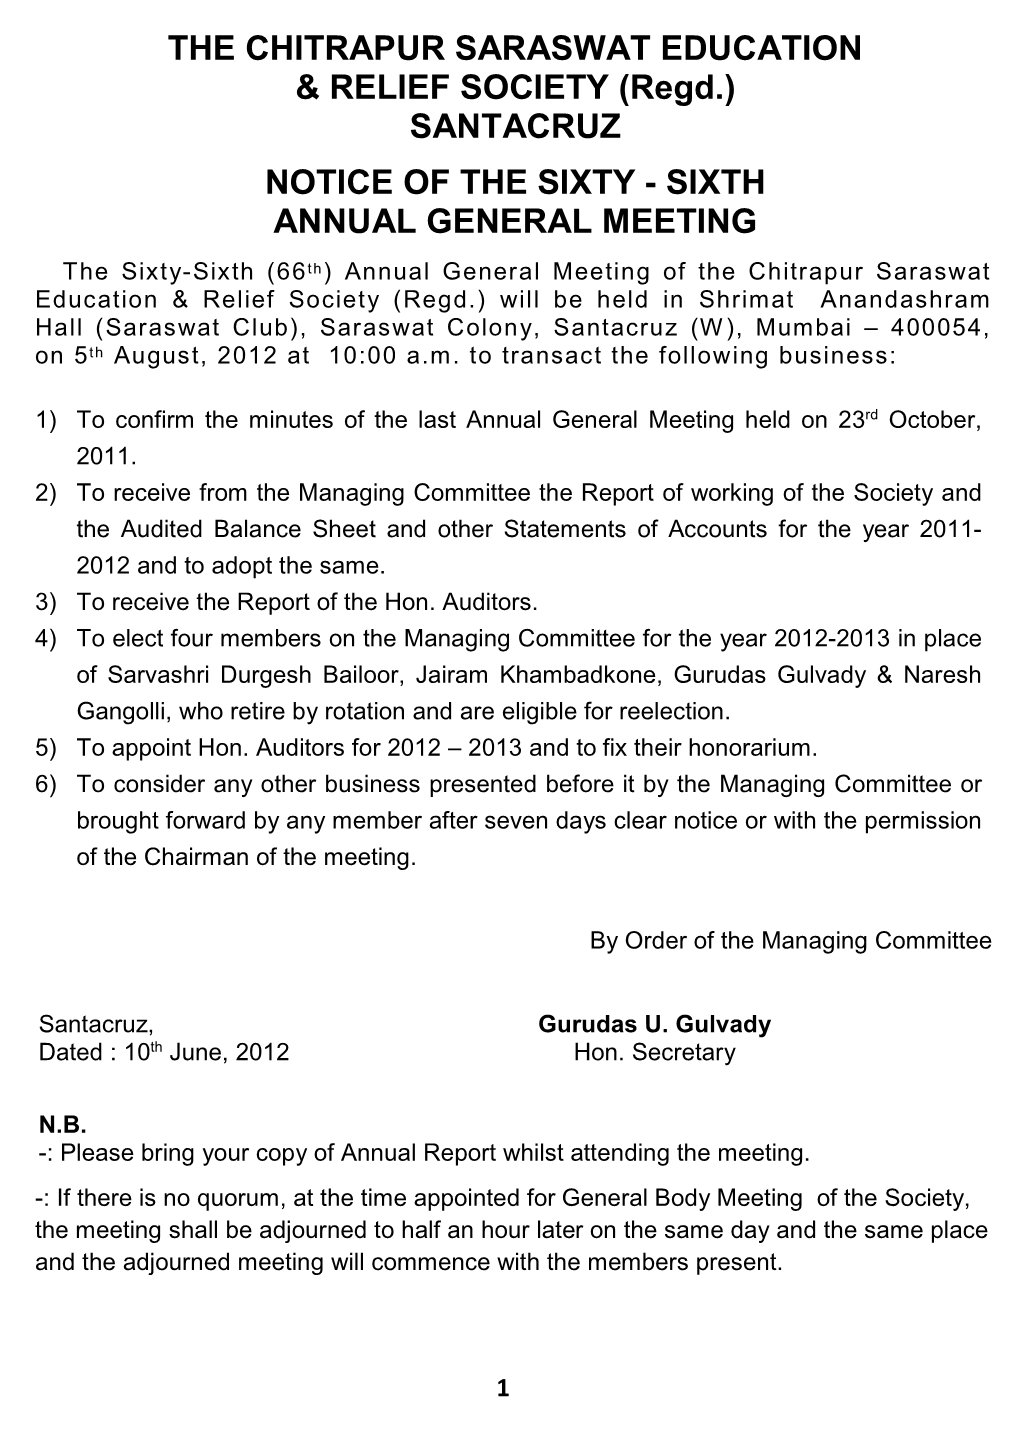 Sixth Annual General Meeting